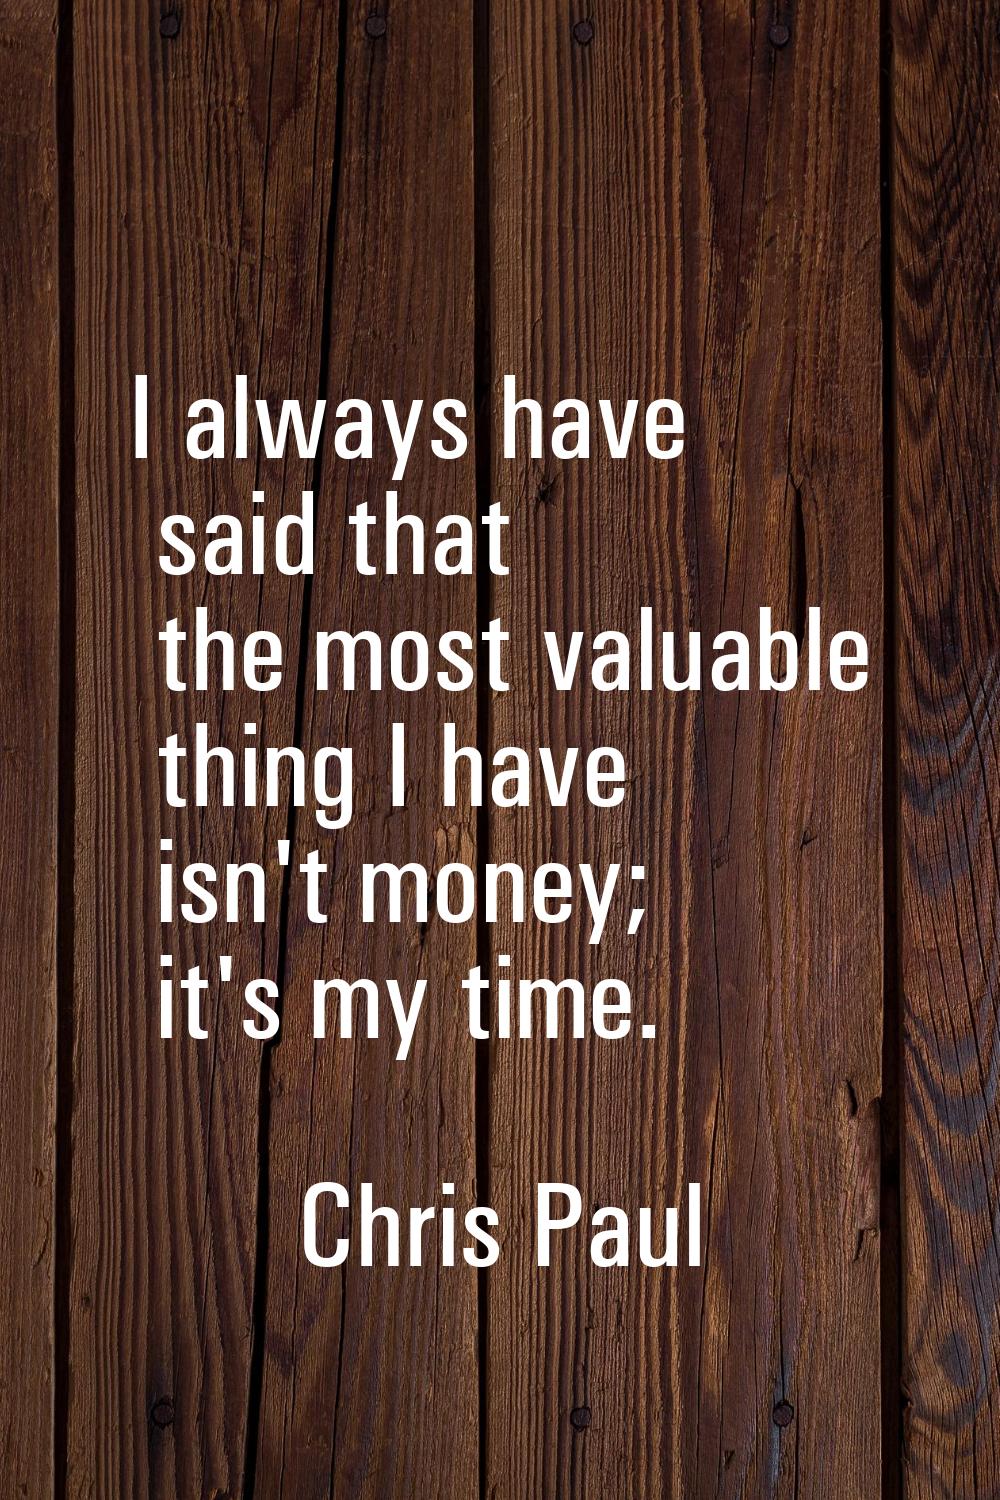 I always have said that the most valuable thing I have isn't money; it's my time.